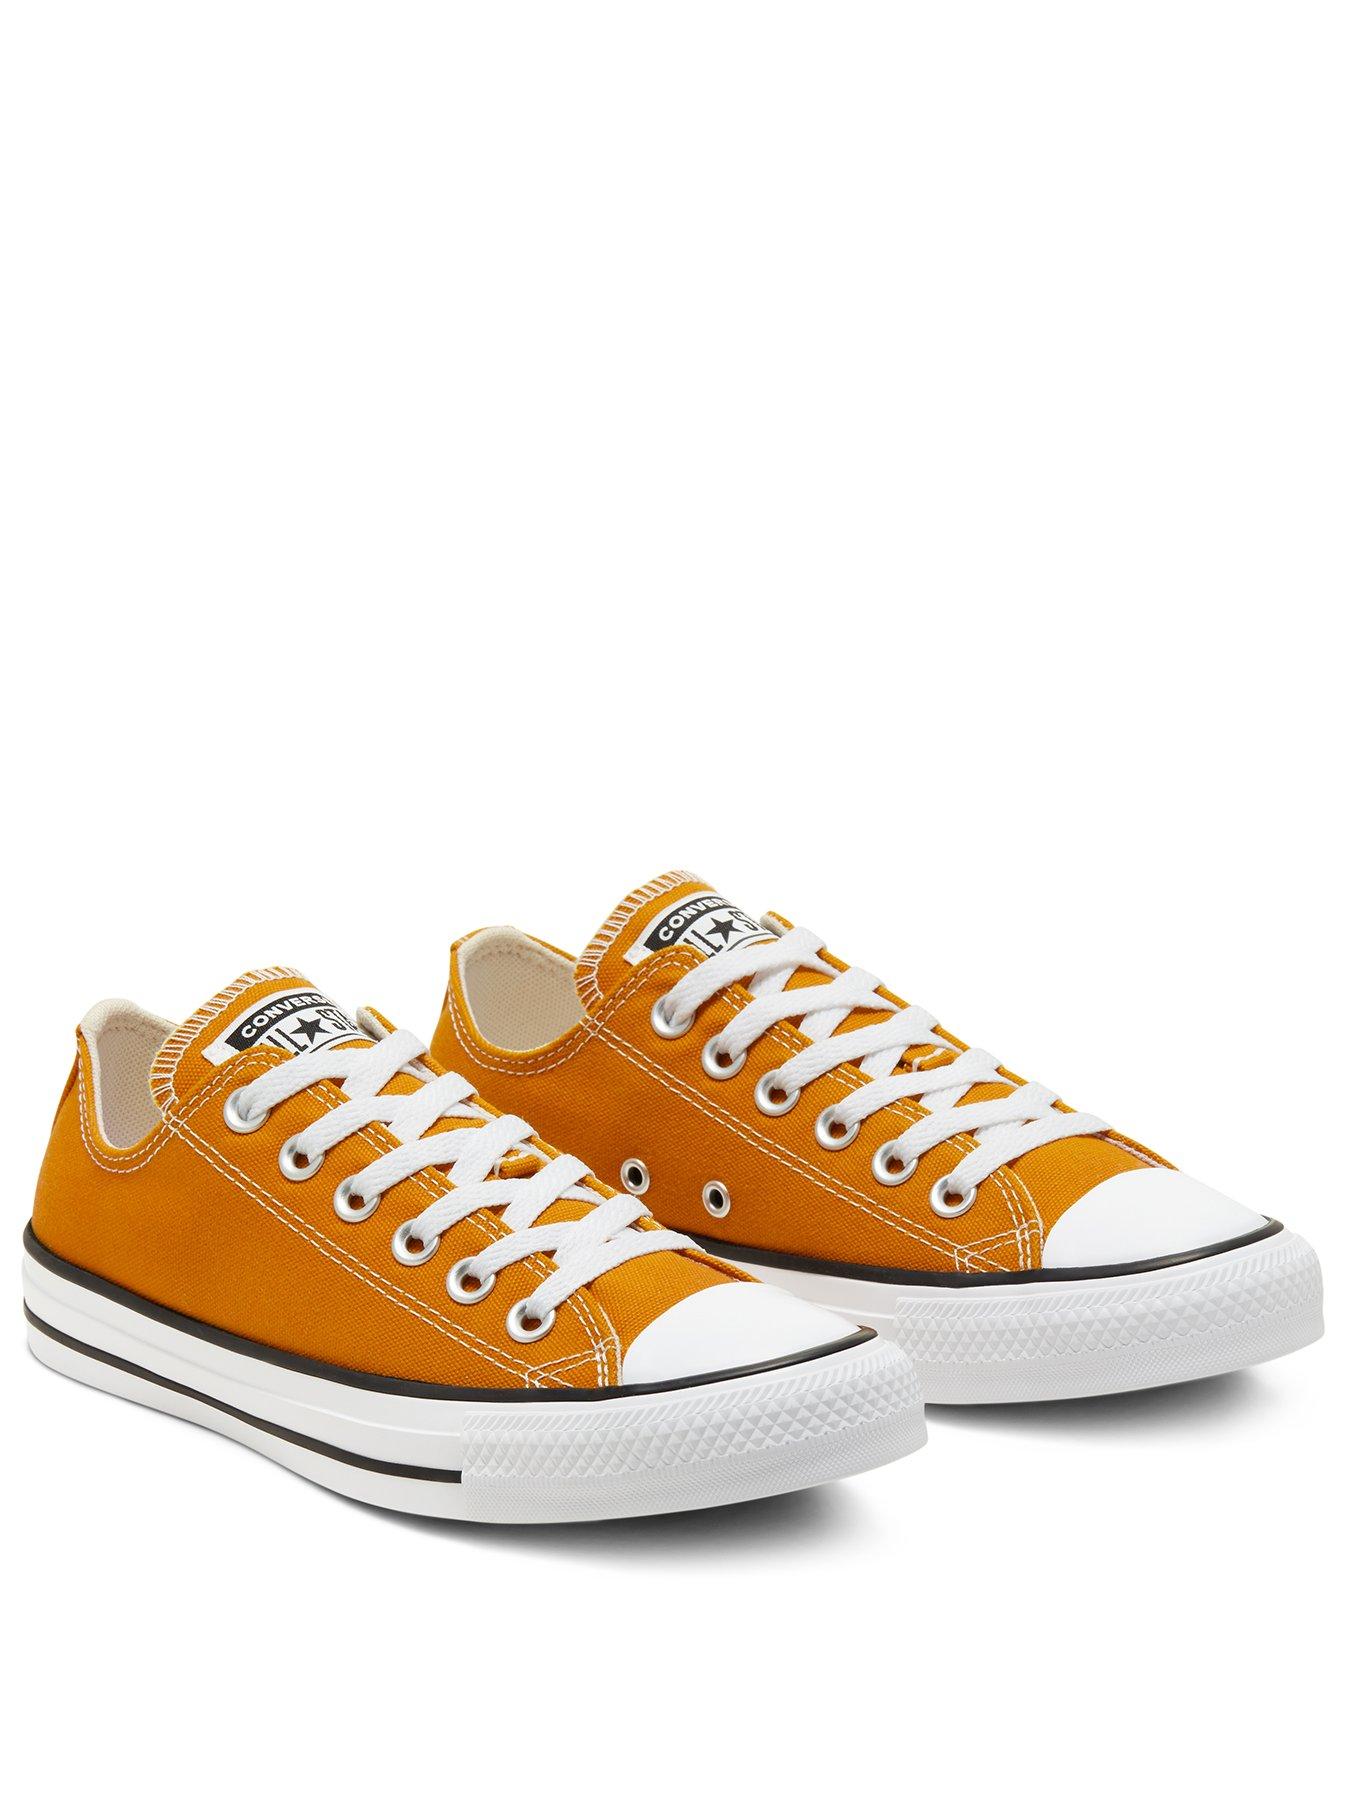 converse chuck taylor all star ox yellow